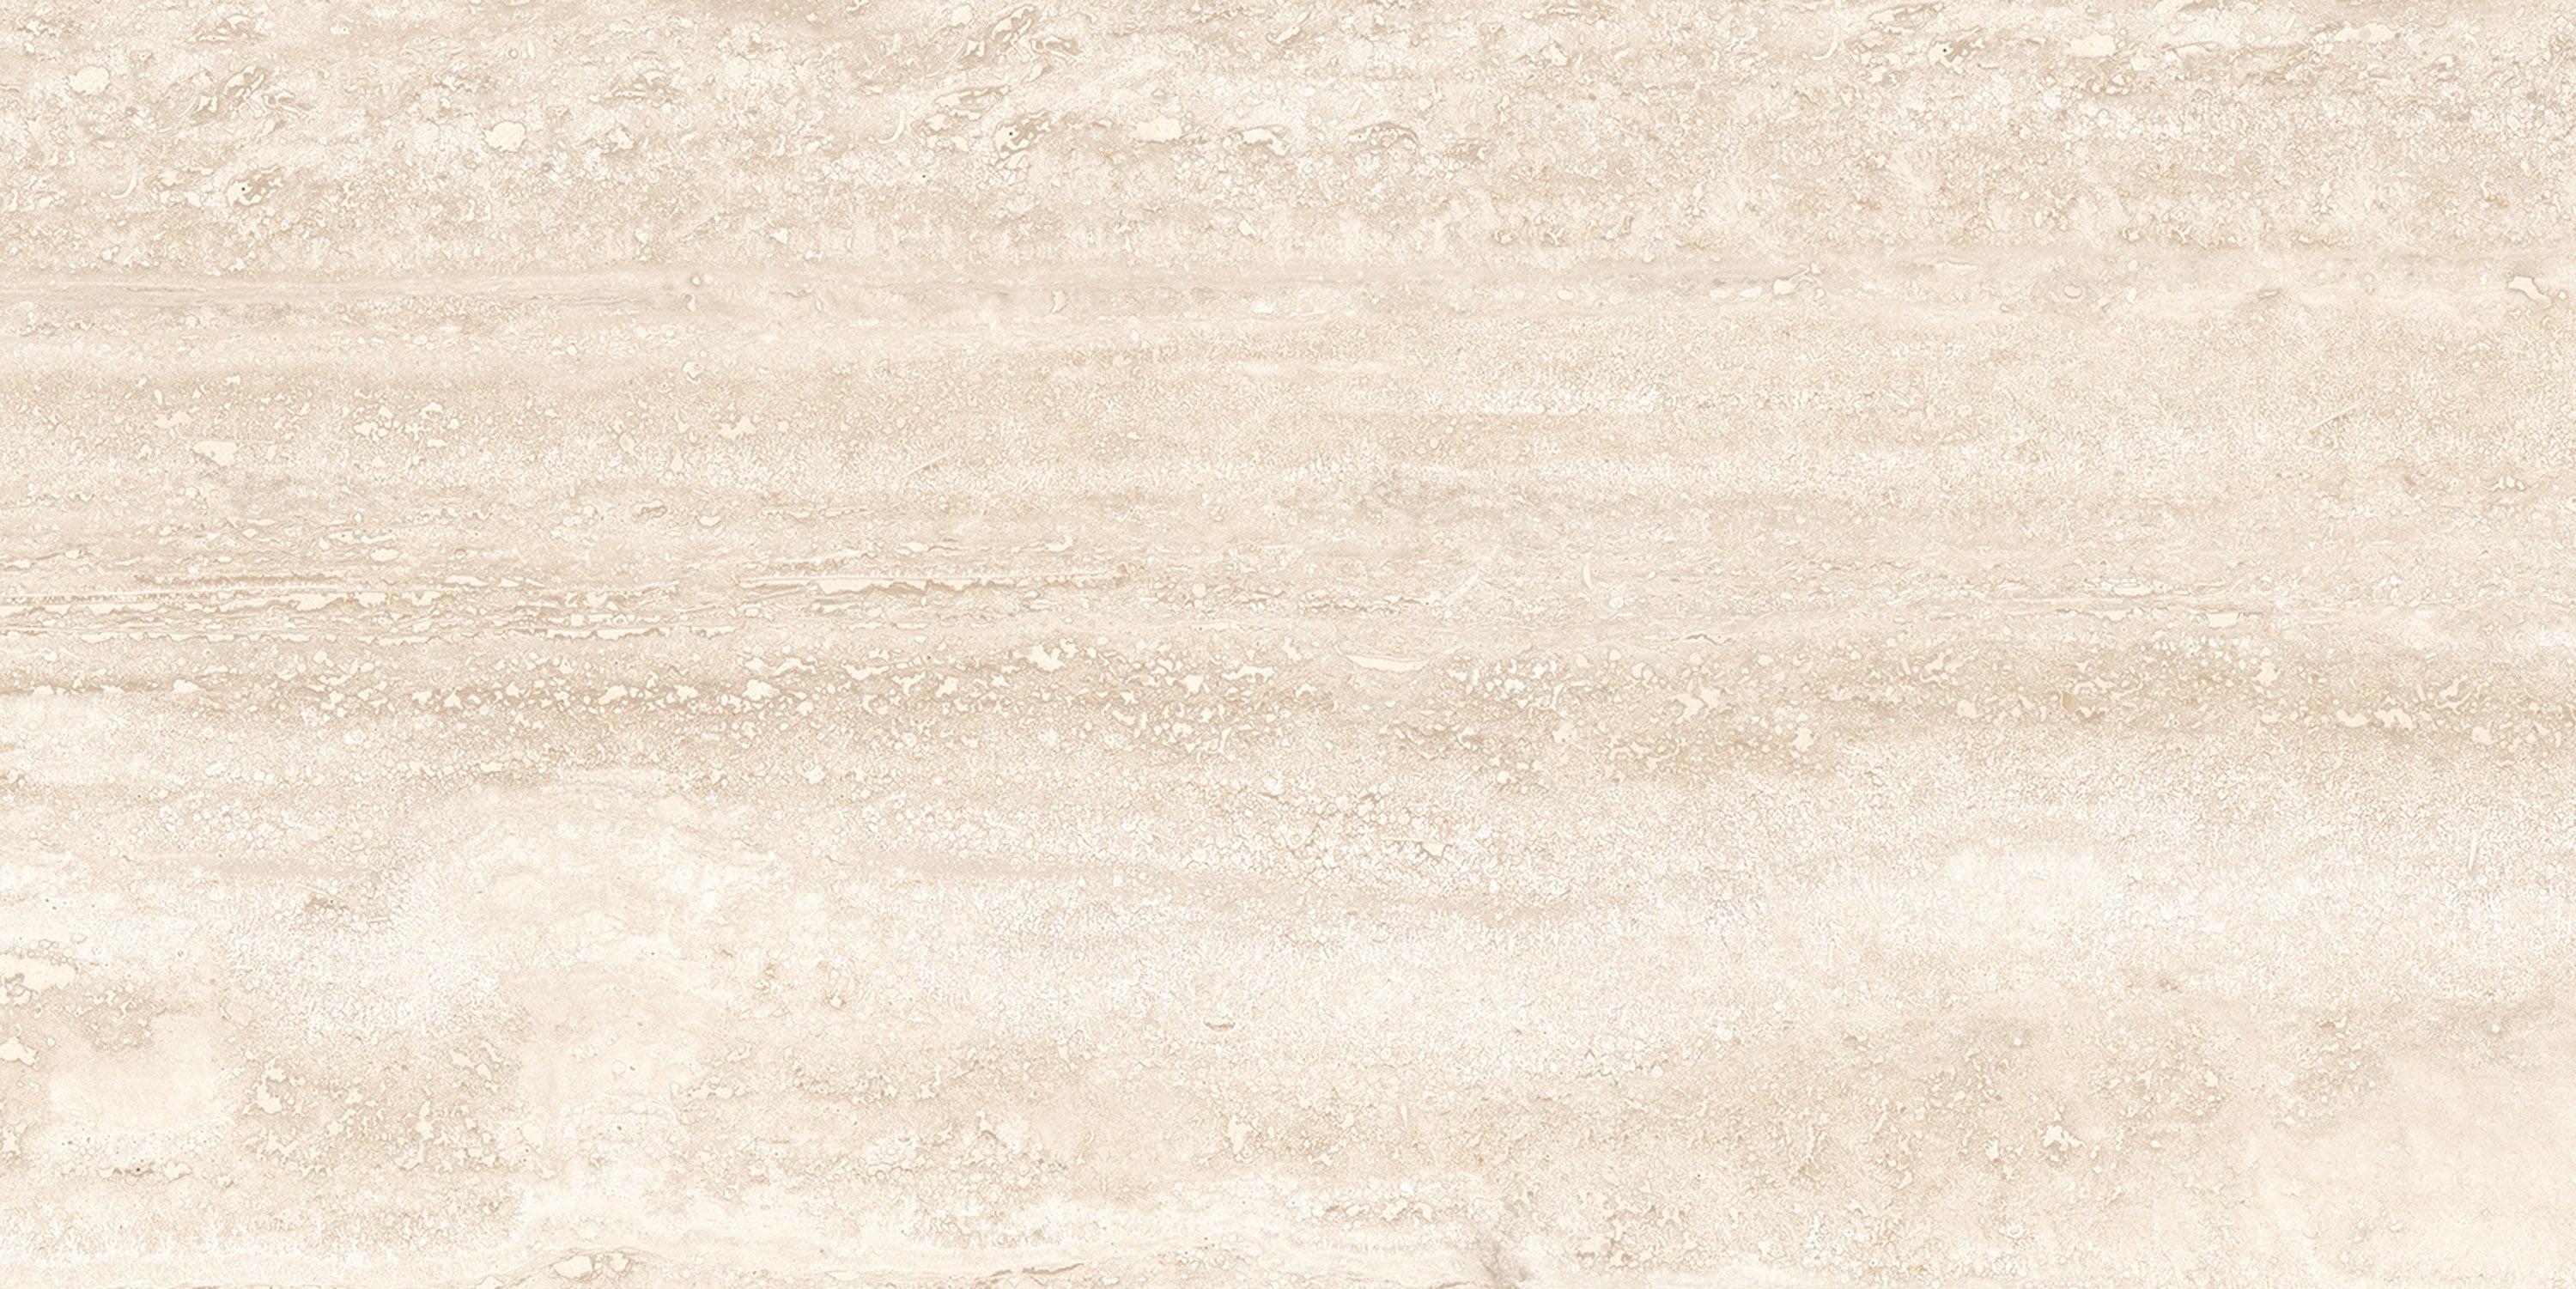 landmark contract pisa beige field tile 12x24x8mm matte pressed porcelain tile distributed by surface group international